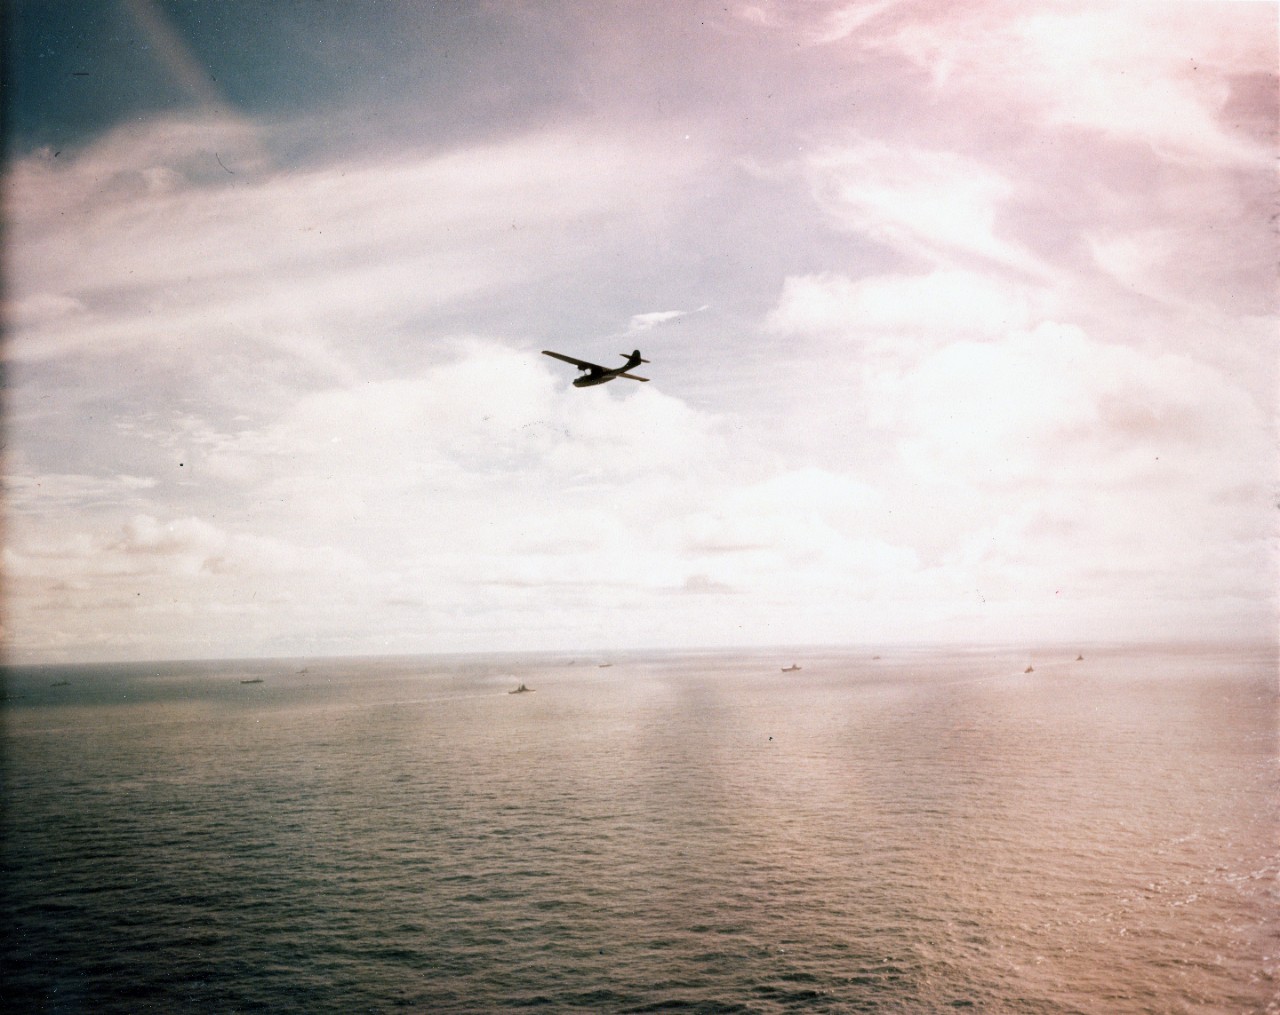 Consolidated PBY "Catalina" Patrol Bomber flies over warships steaming toward the Panama Canal, en route to the Atlantic Coast Navy Day Celebrations, October 1945.